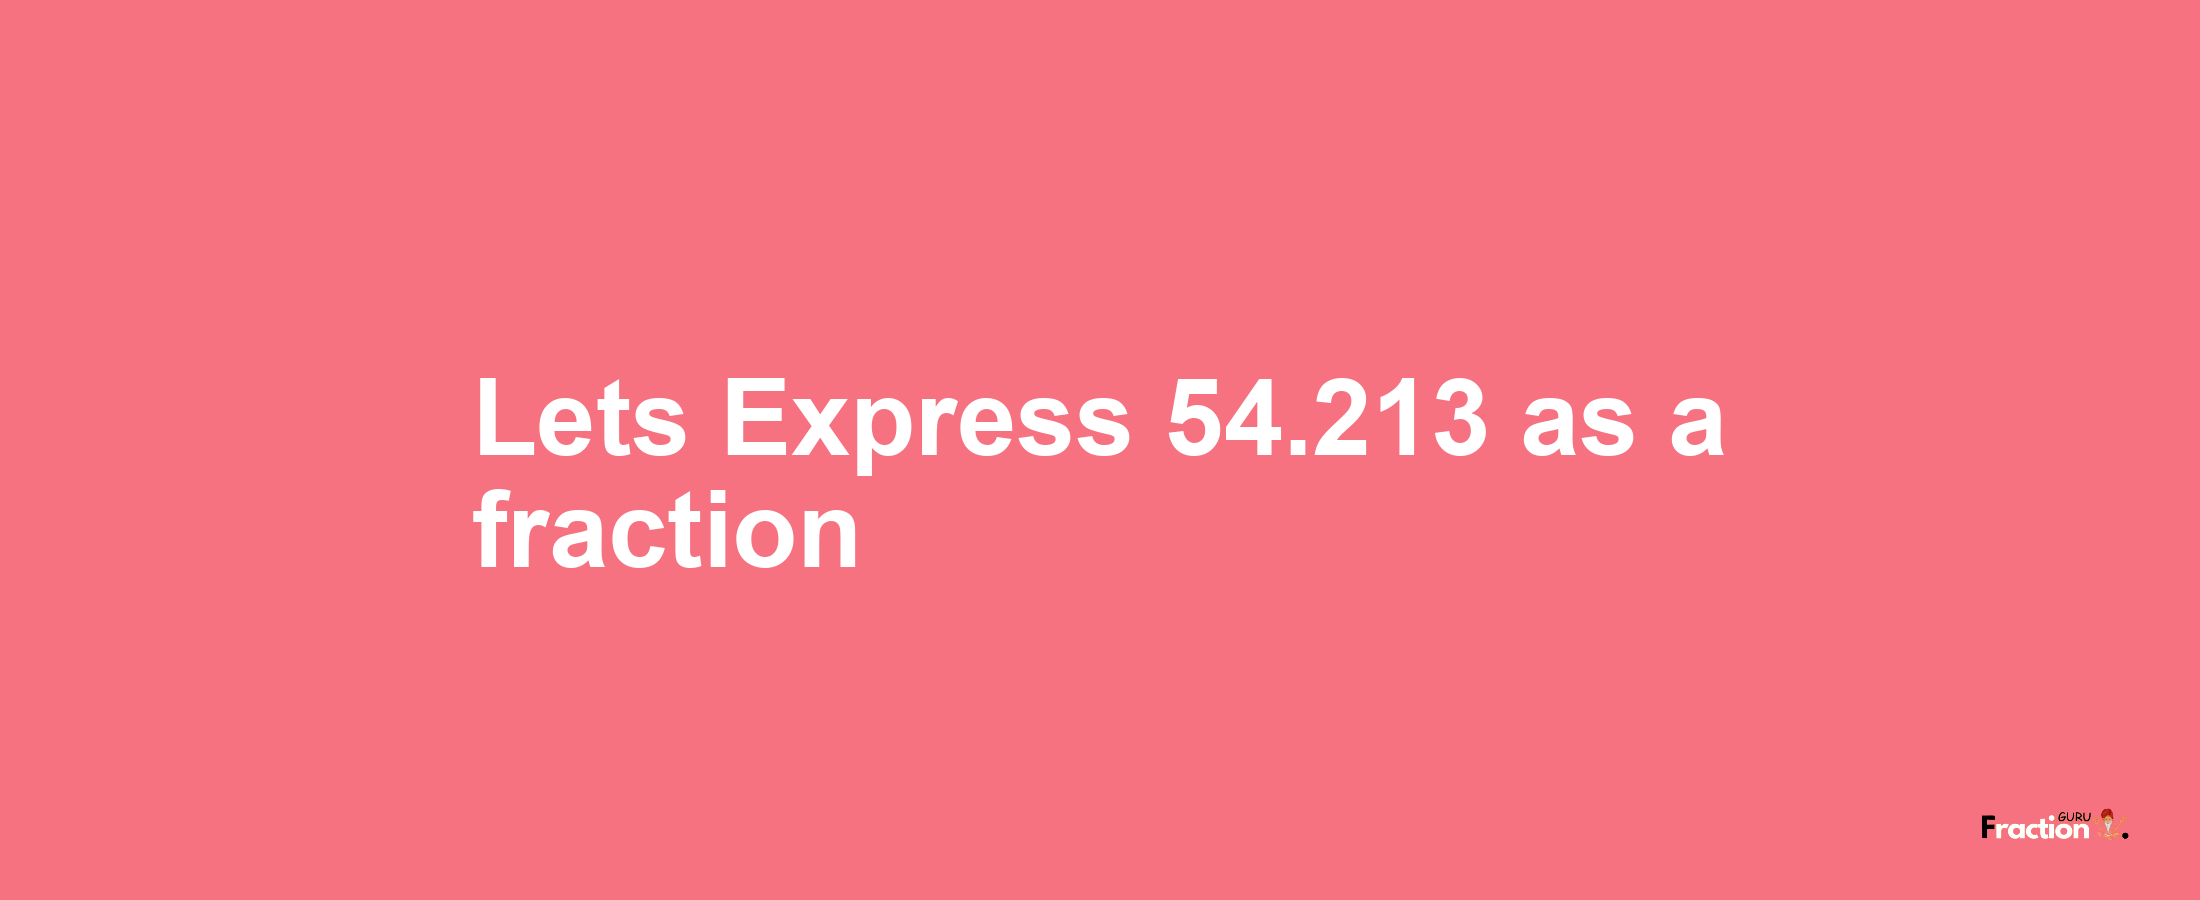 Lets Express 54.213 as afraction